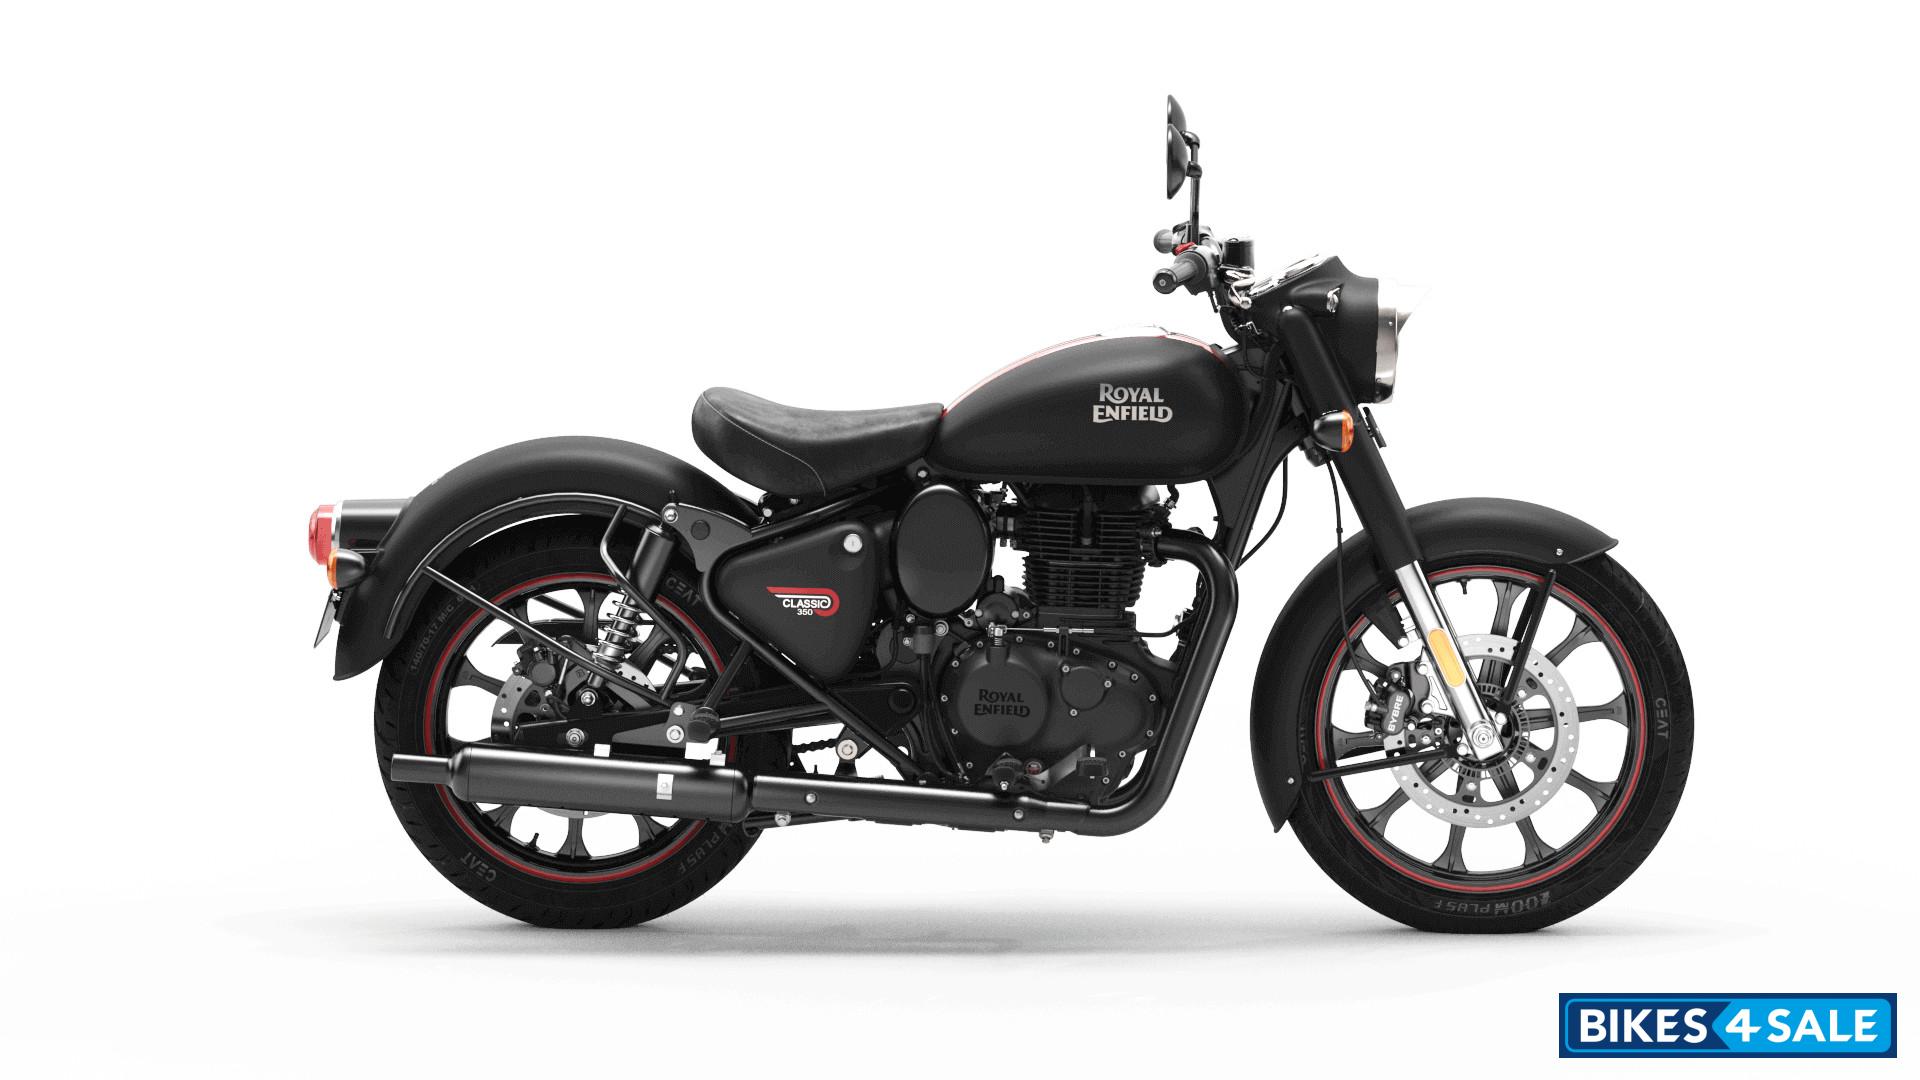 Royal Enfield Classic 350 2021 Motorcycle Picture Gallery. DARK STEALTH  BLACK - Bikes4Sale